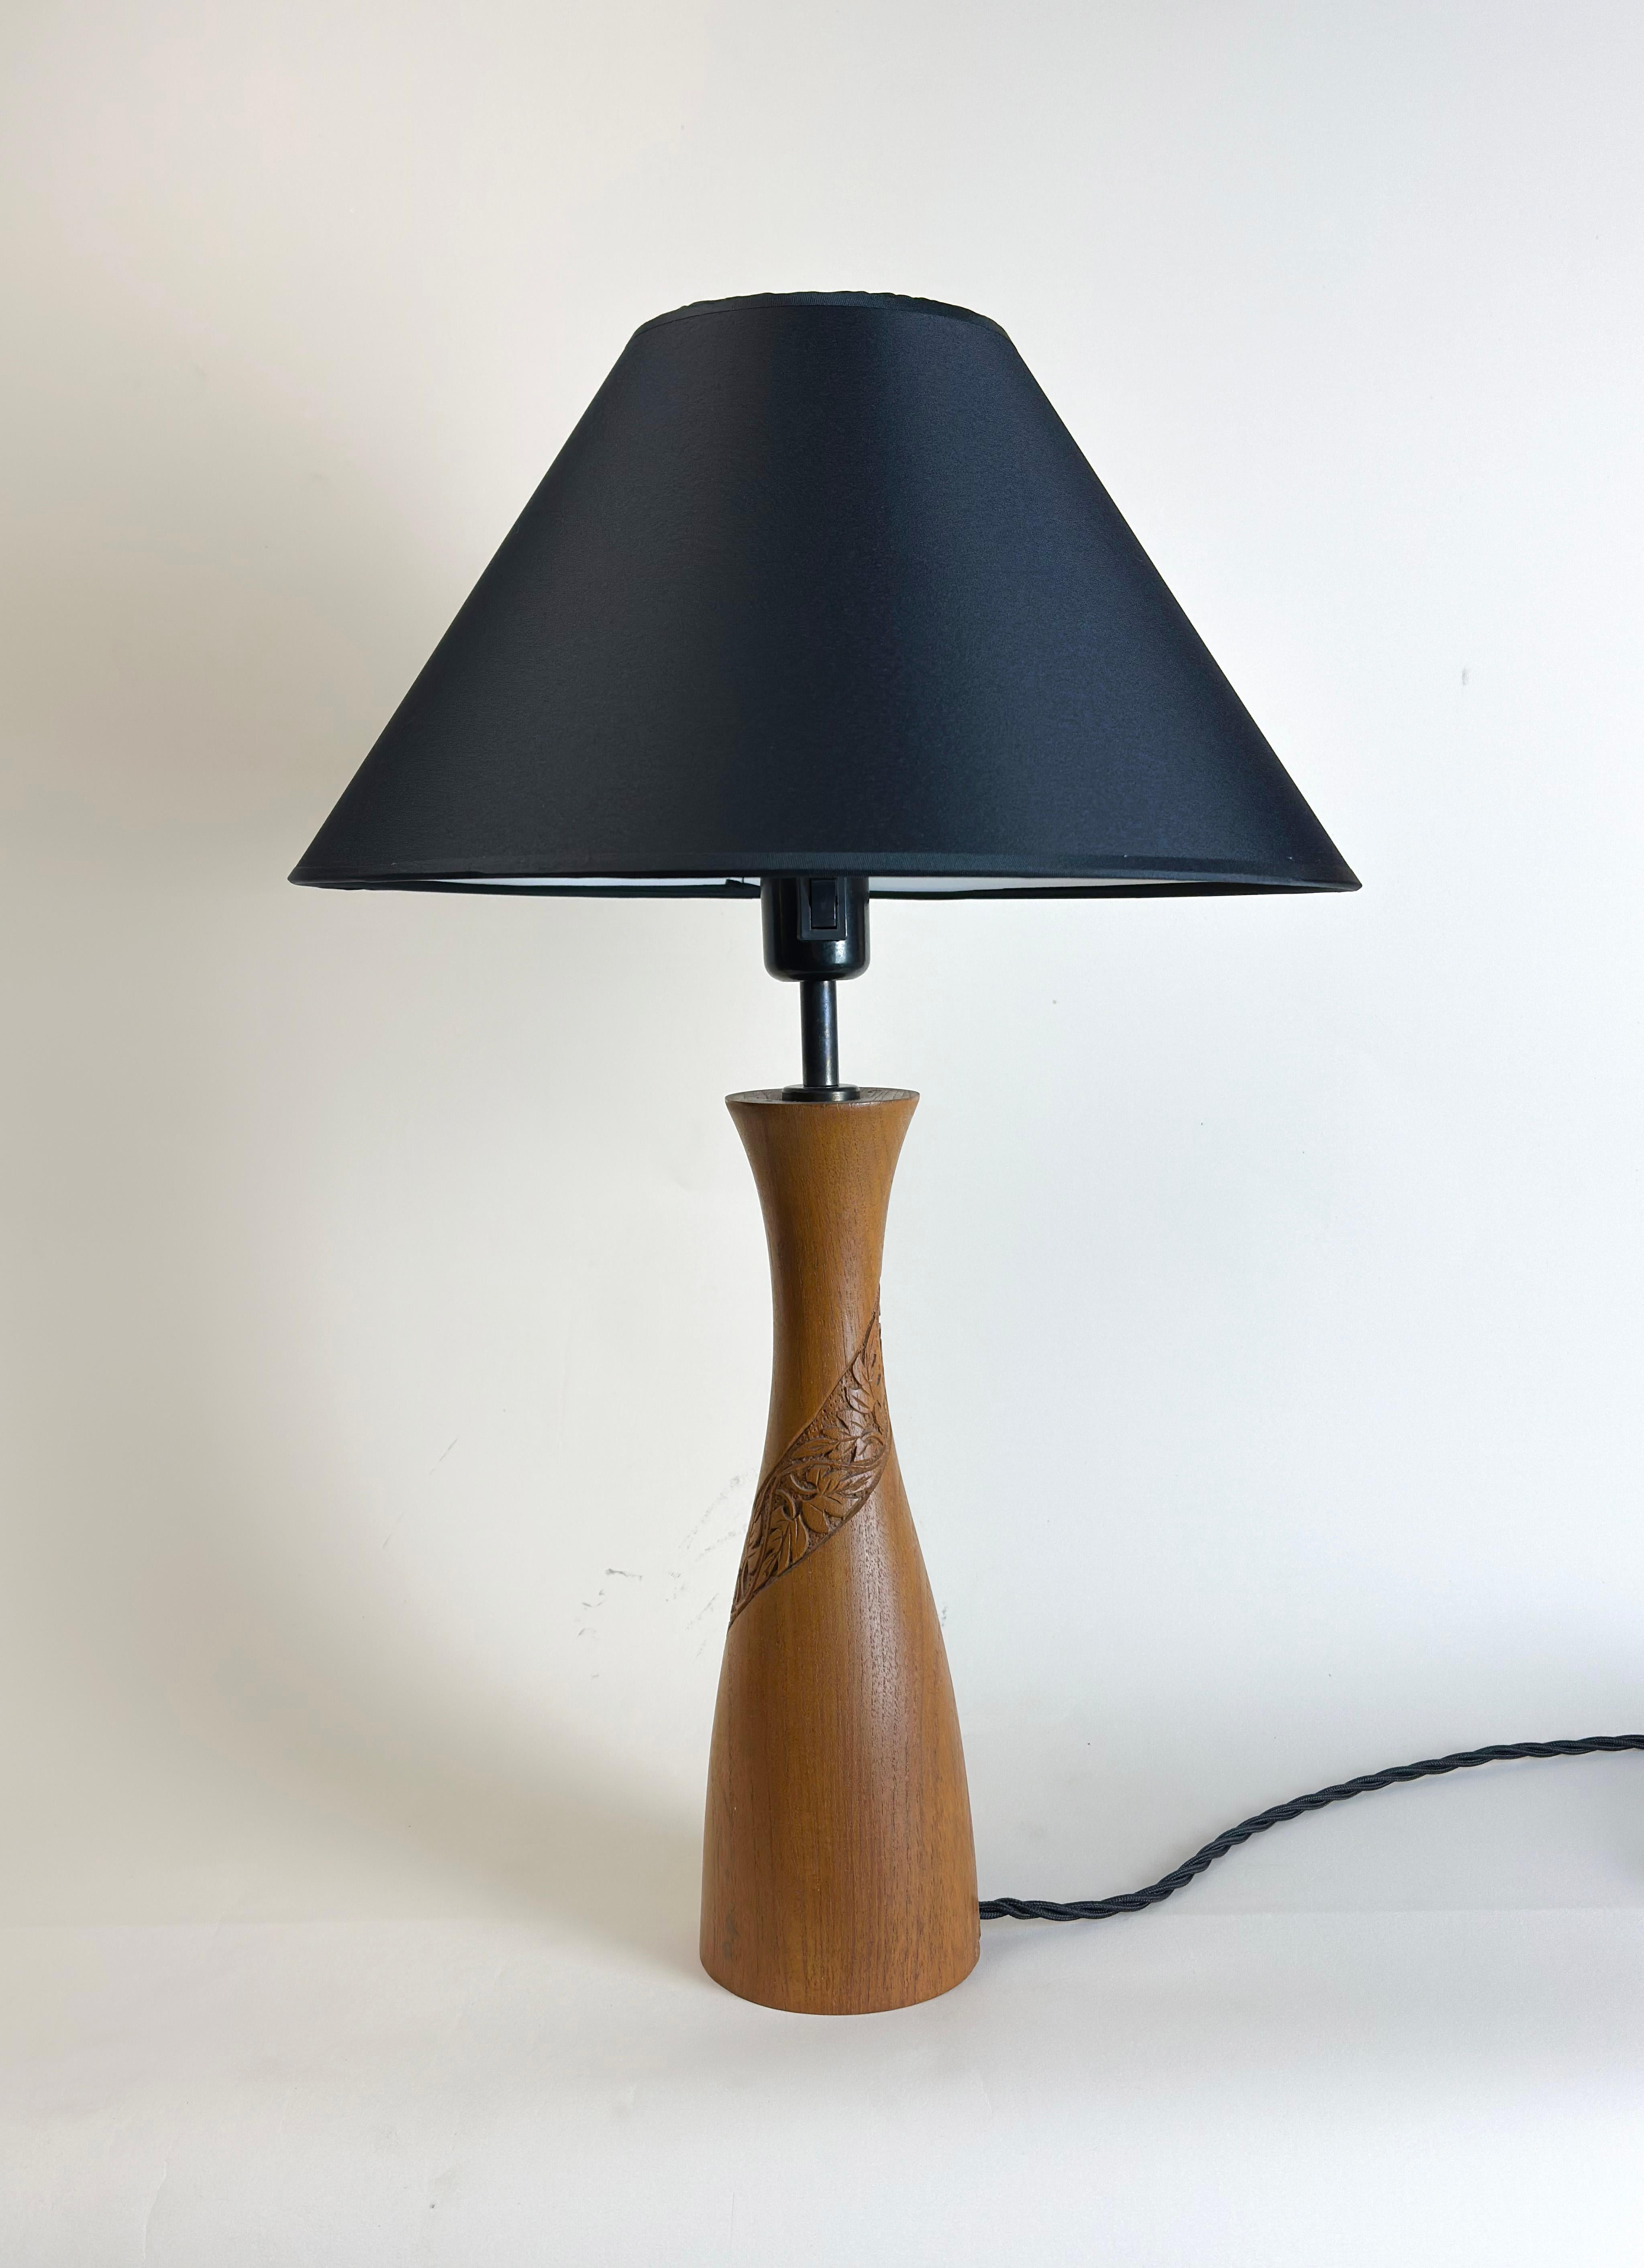 A Mid-Century Danish-style table lamp, this piece boasts a hand-turned body crafted from teak wood, adorned with exquisitely hand-carved, folk-style leaf motifs that spiral elegantly around the base.

The lamp has received modern updates, including